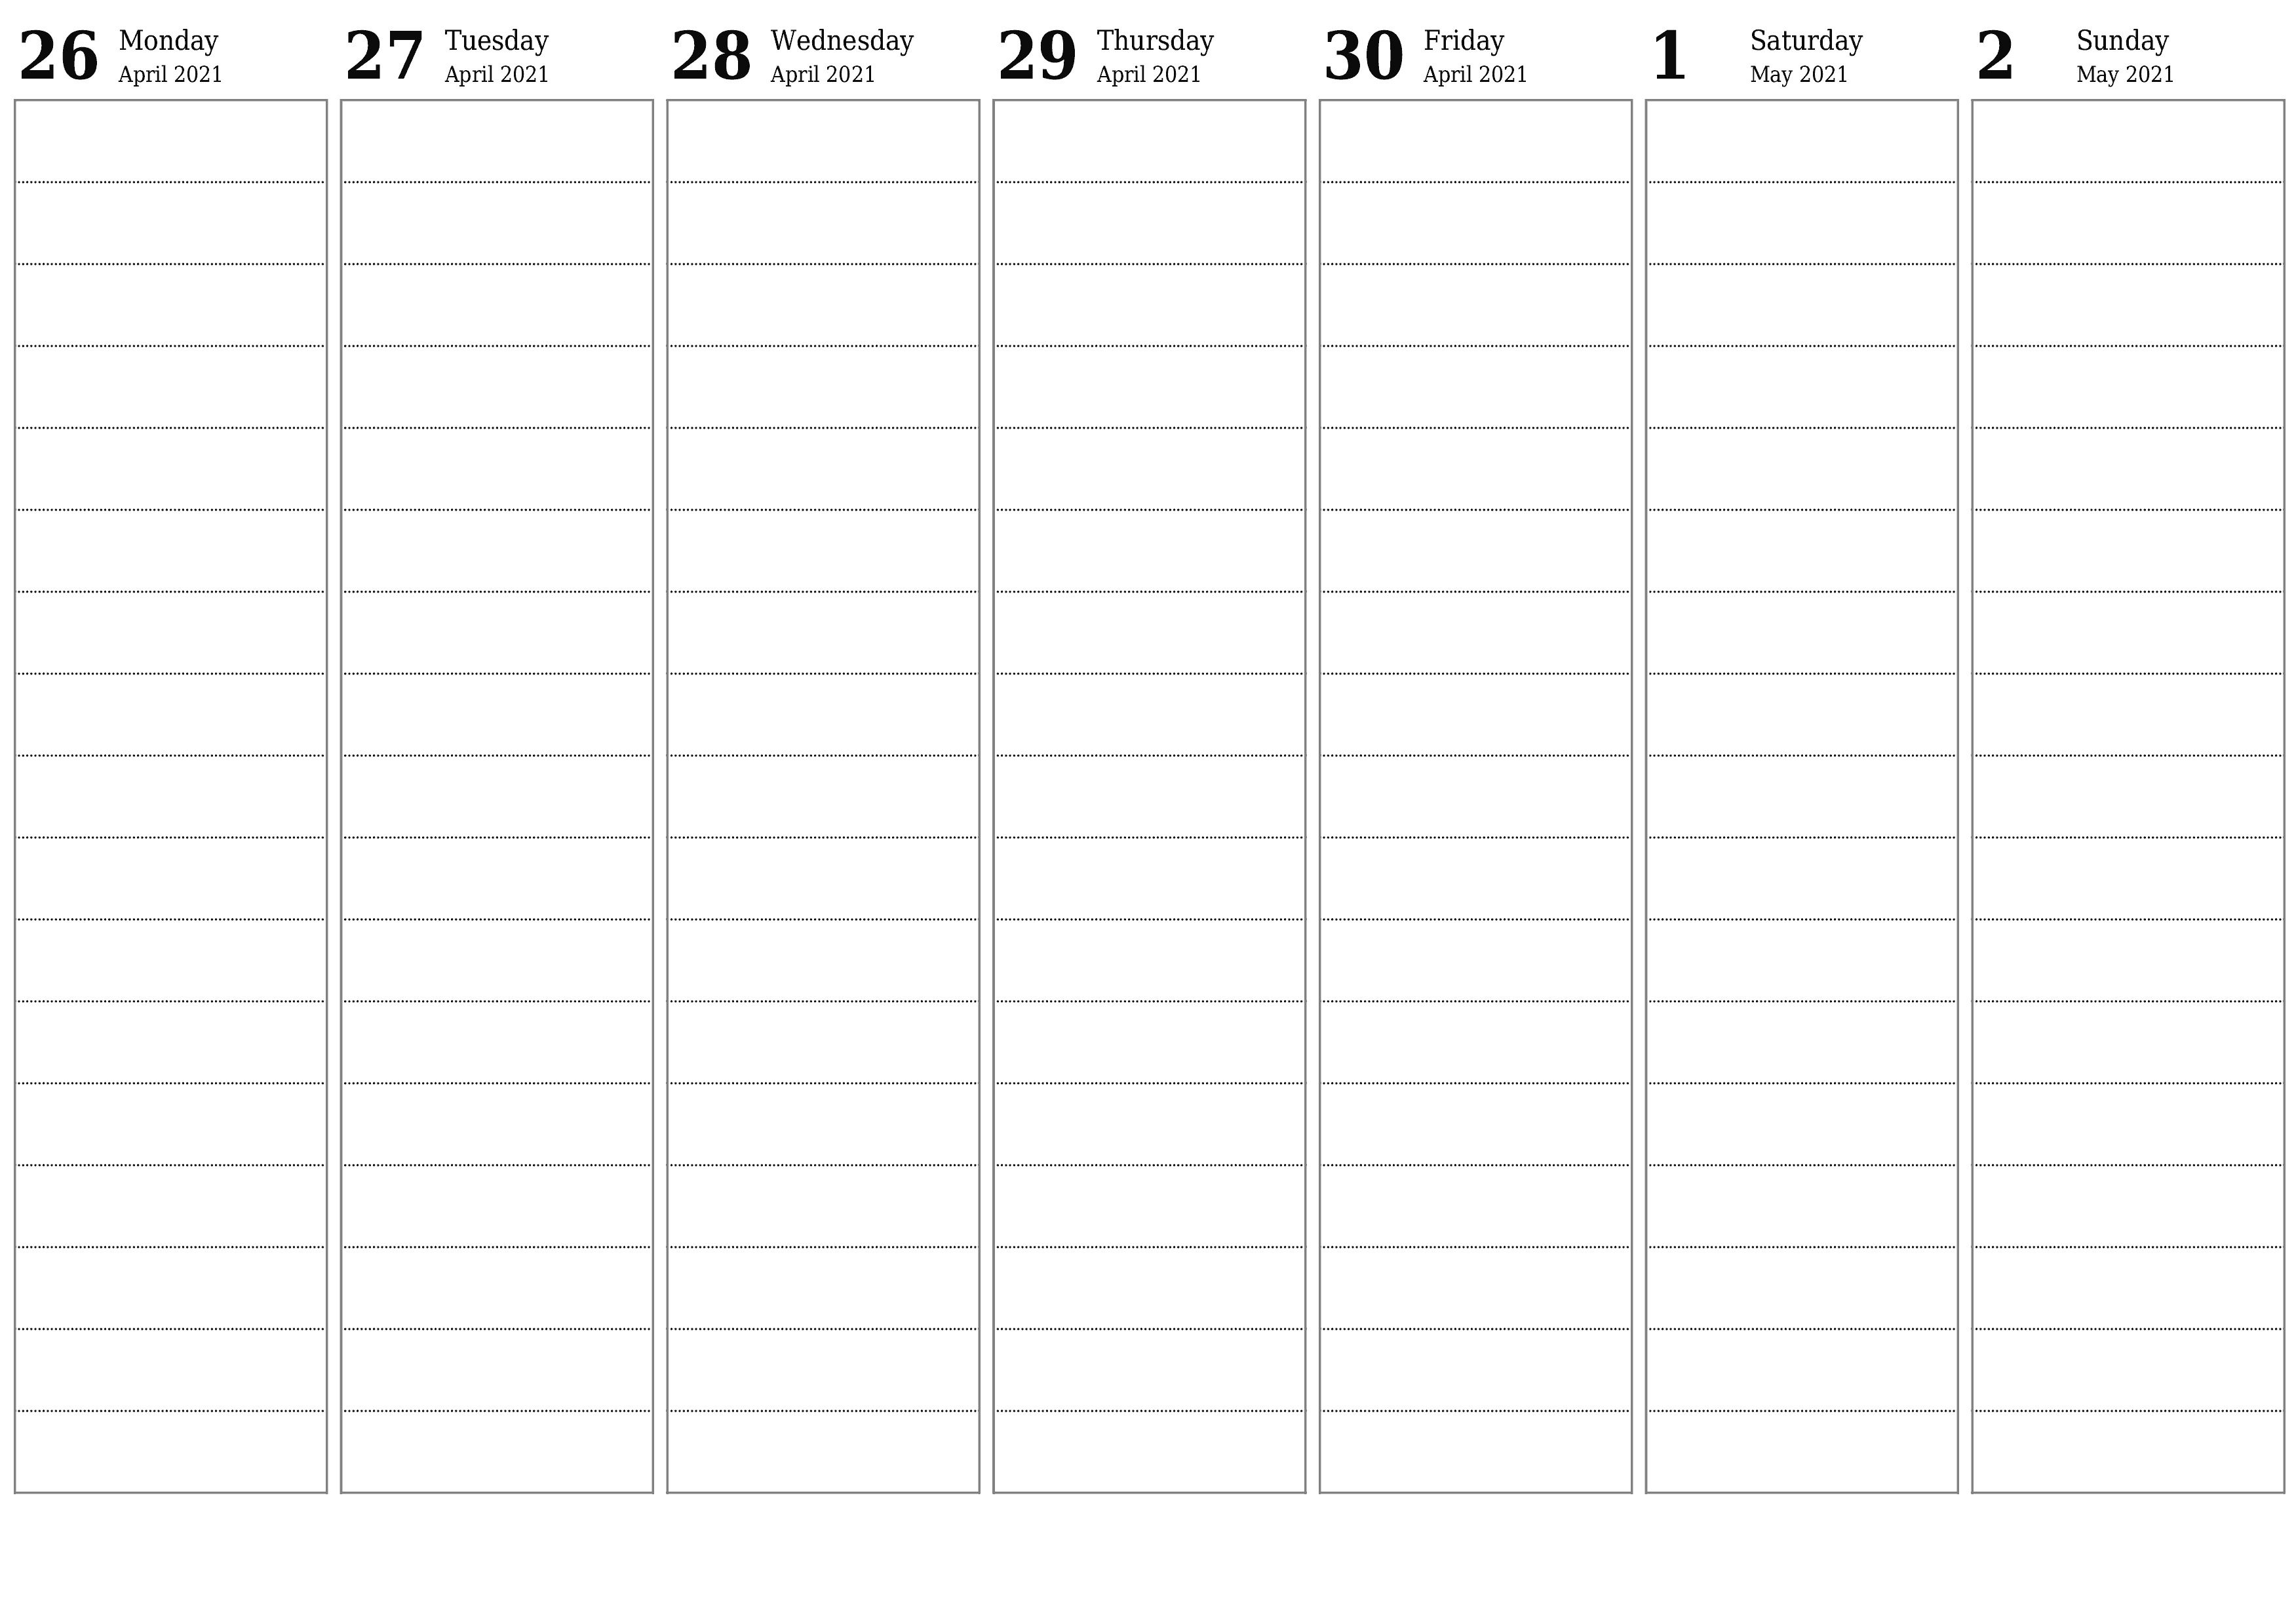 Blank weekly dated HD template image of calendar for week May 2021 save and print to PDF PNG English - 7calendar.com